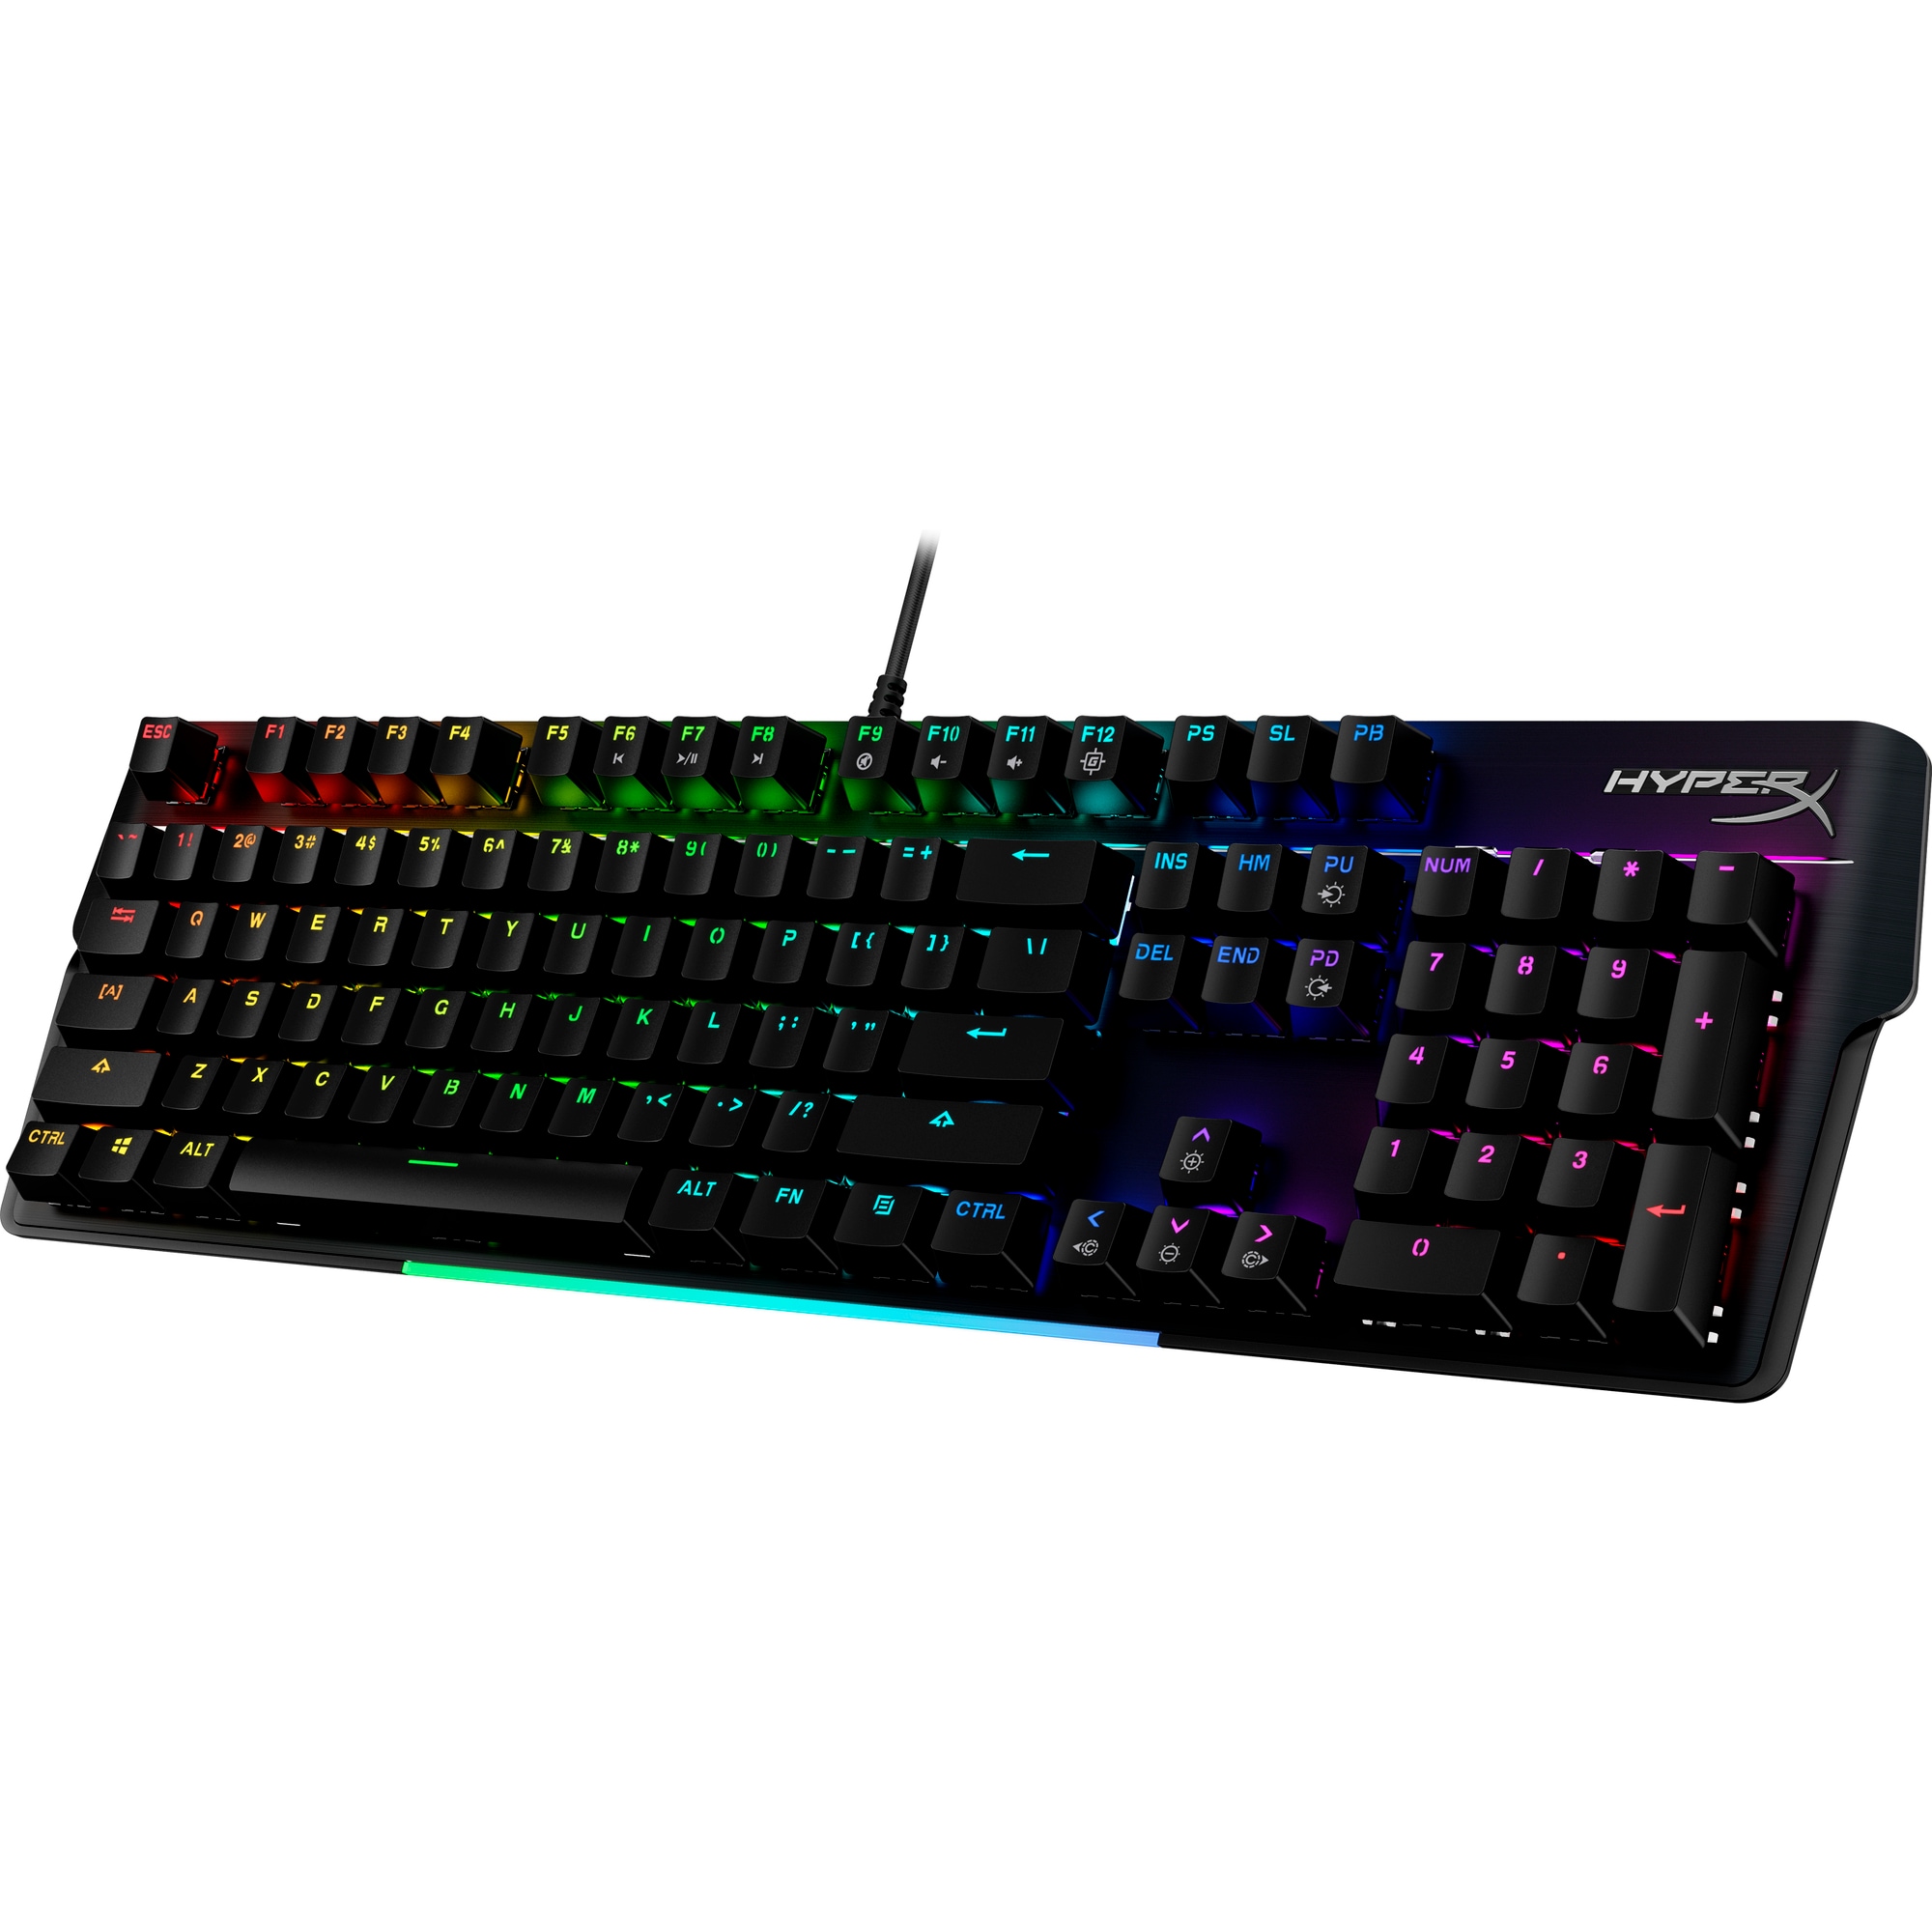 HyperX Alloy MKW100 - Mechnical Gaming Keyboard - Red (US Layout) (HKBM1-R-US/ G)-US - Klávesnice4 